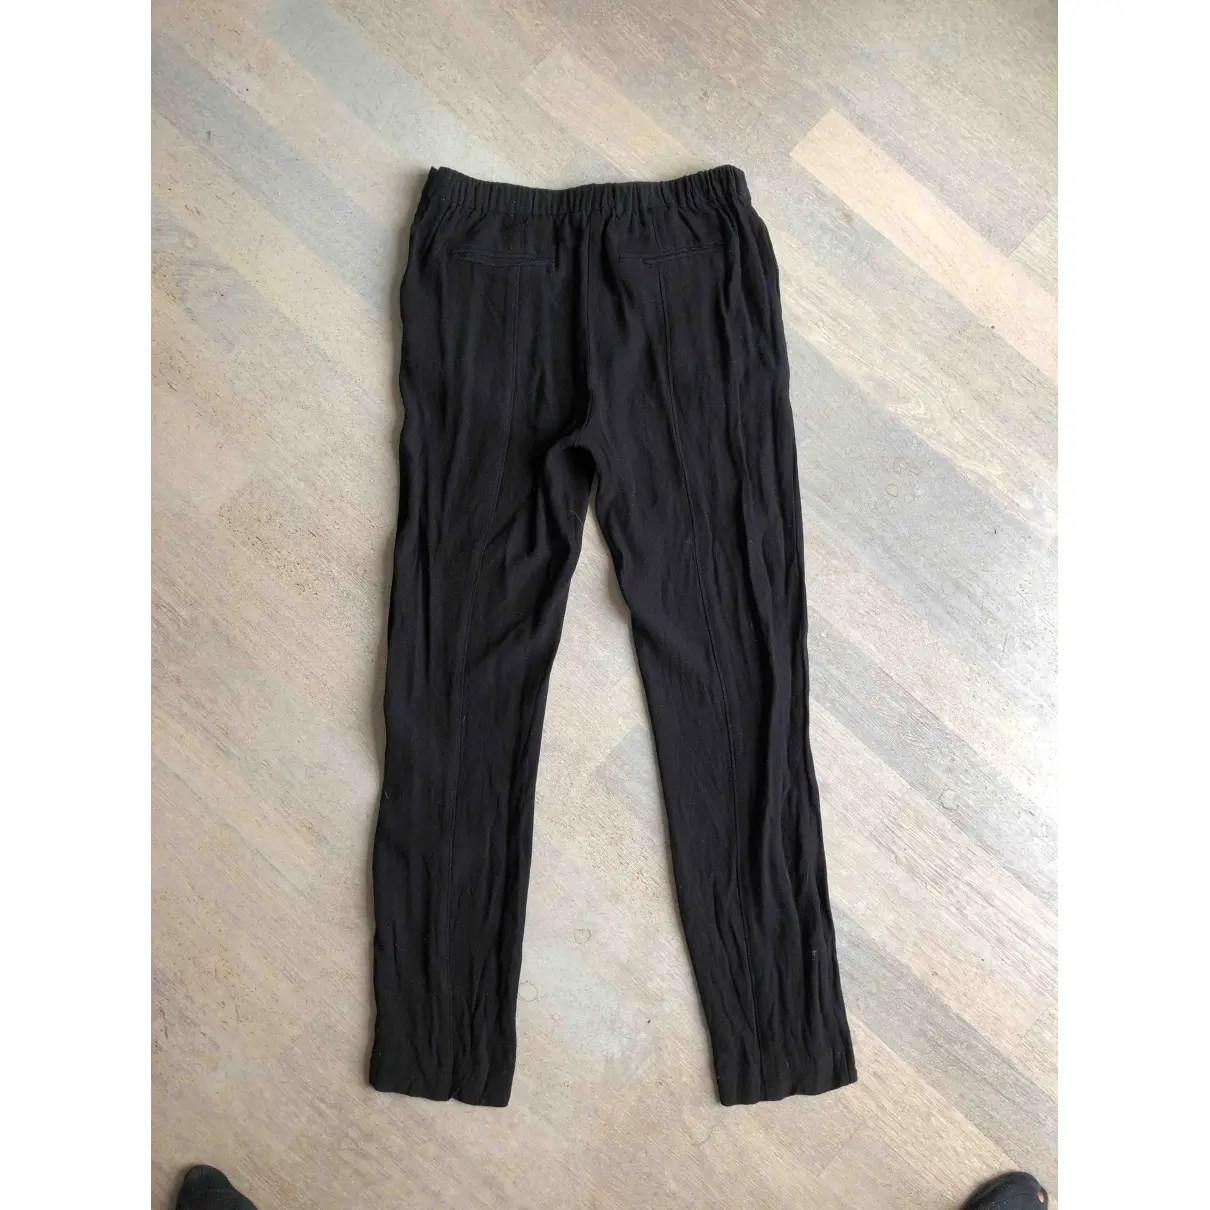 American Vintage Trousers for sale